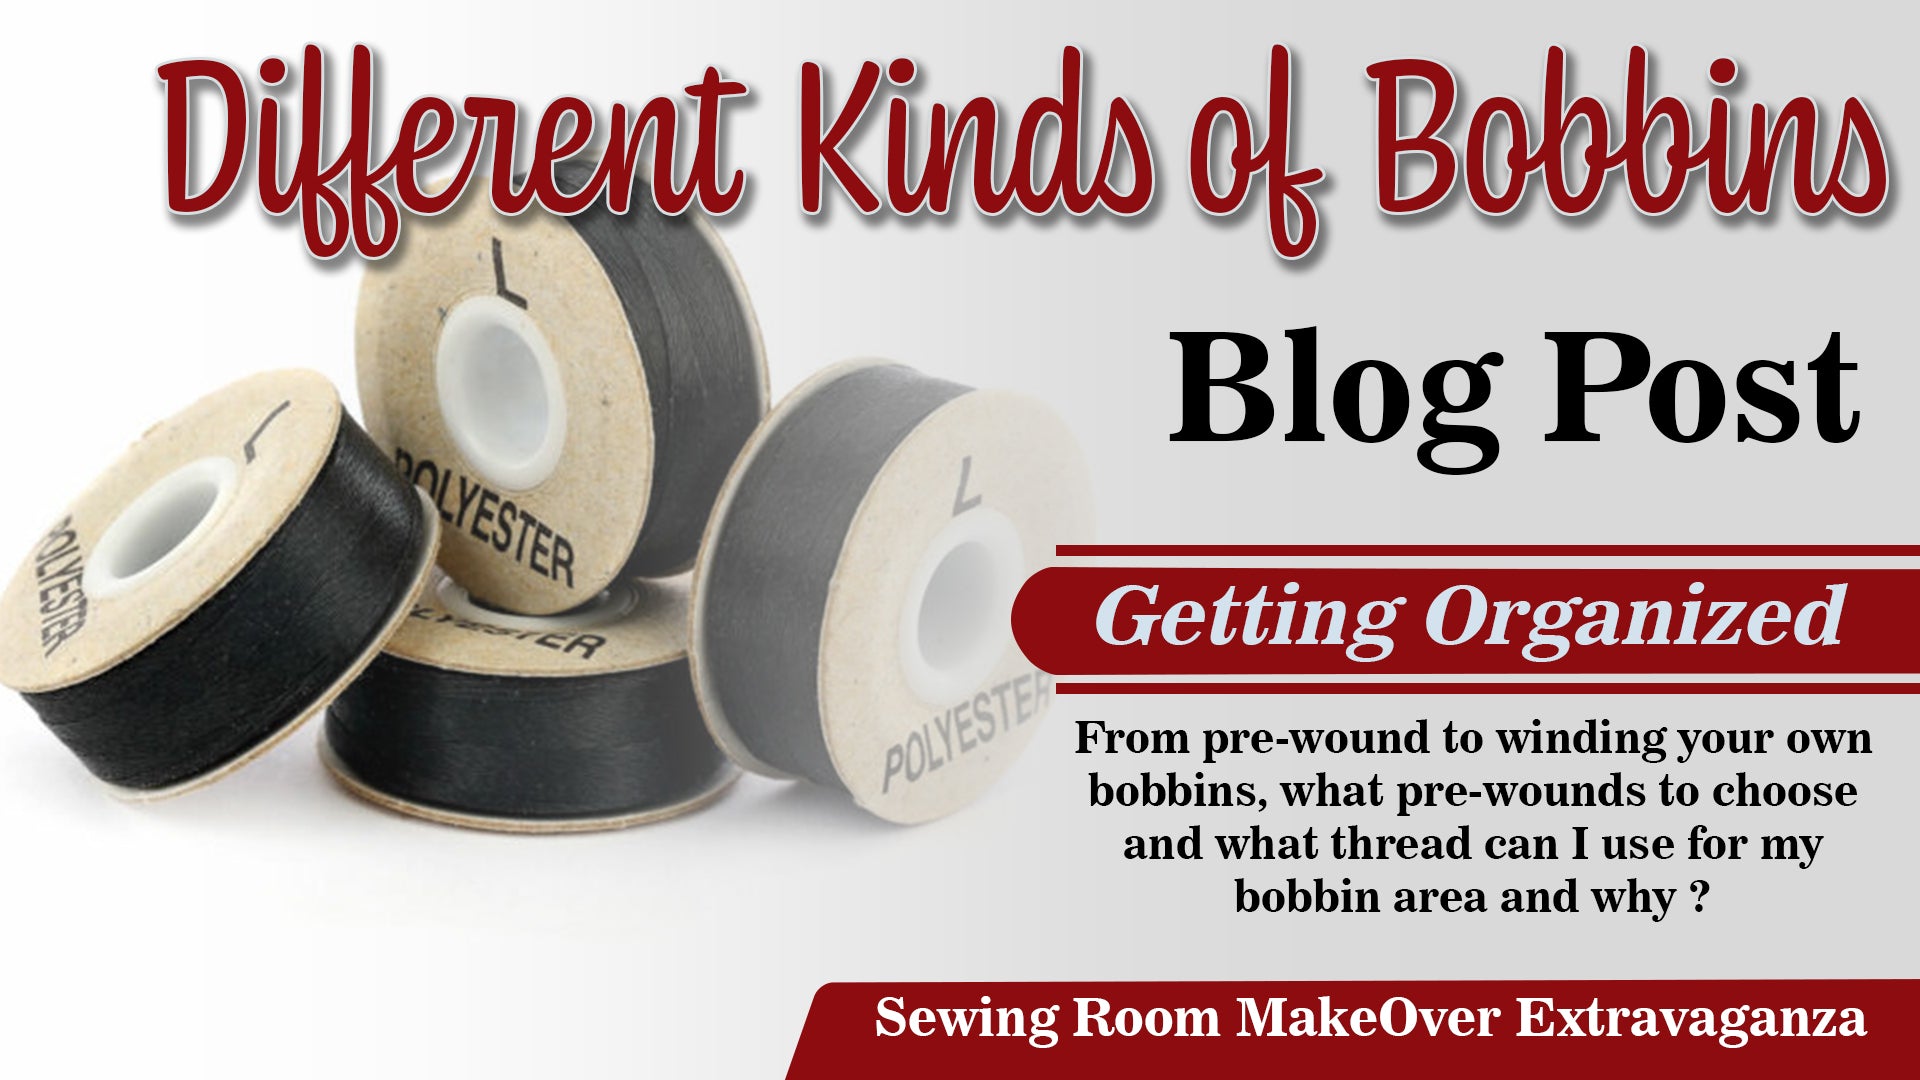 Bobbins, what to use when and why